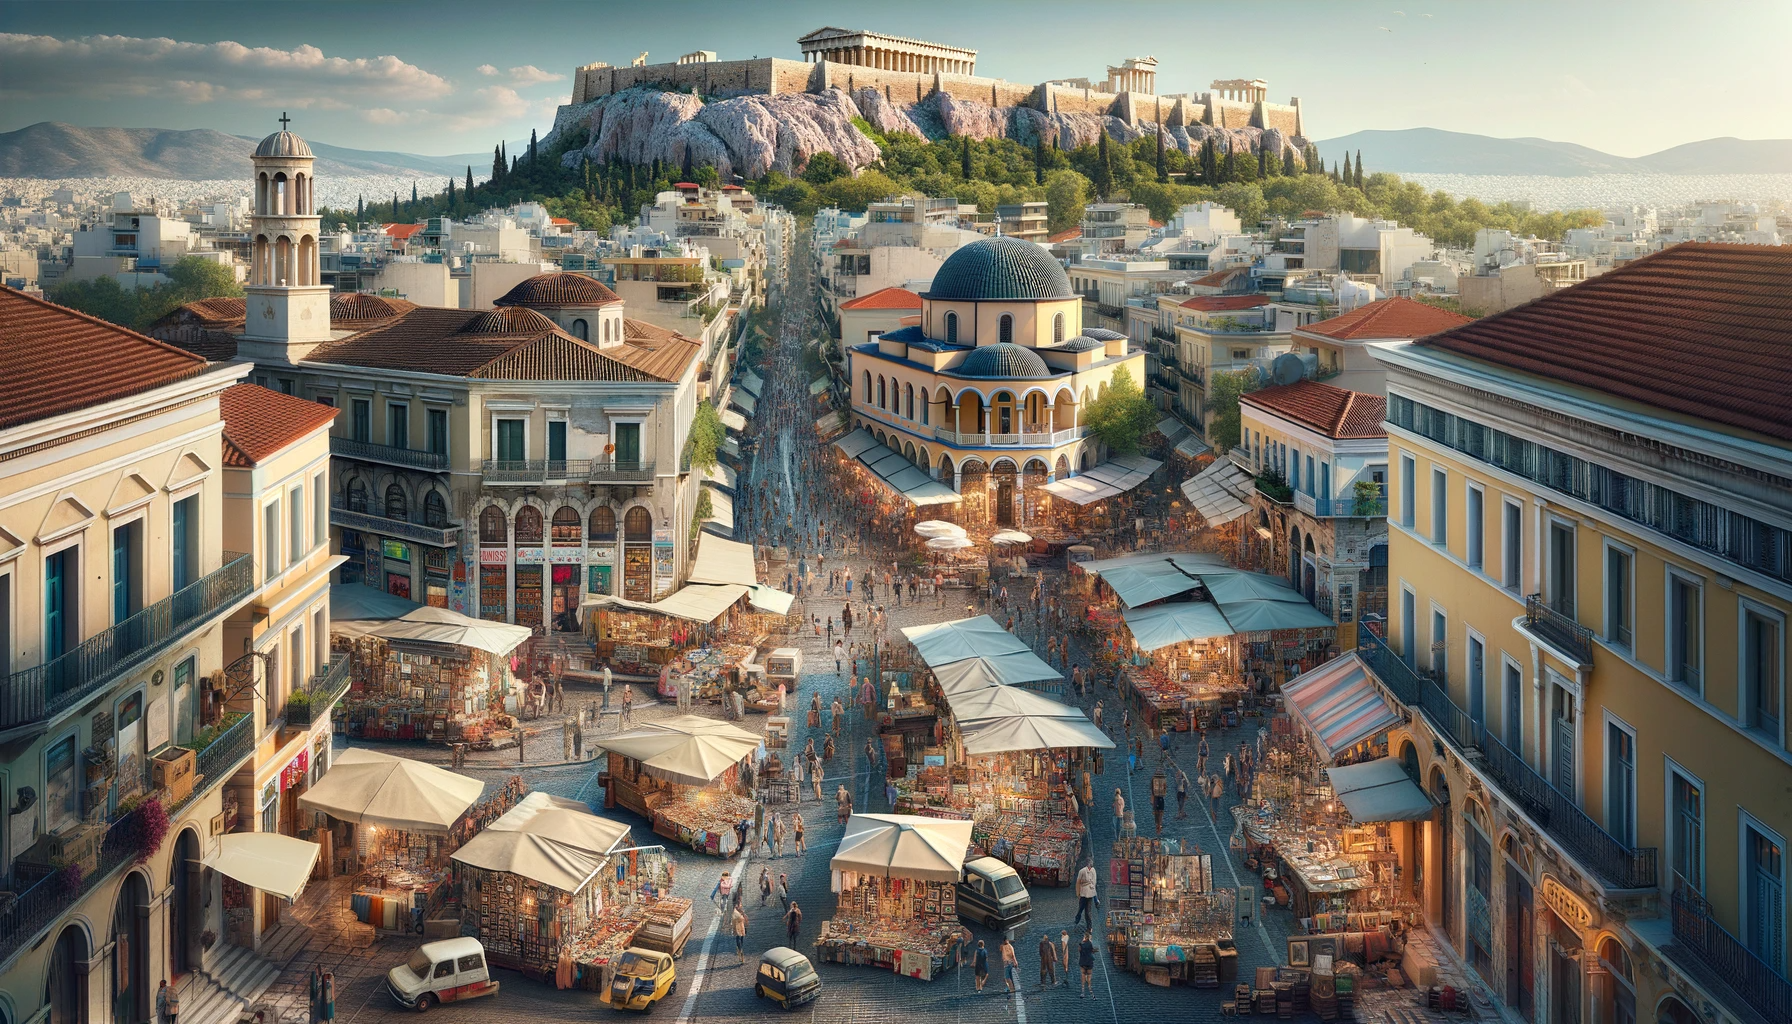 DALL·E 2023 11 26 22.32.37 An ultra ultra realistic image of the Monastiraki area in Athens Greece capturing its bustling and historic charm. The scene includes the famous Mon